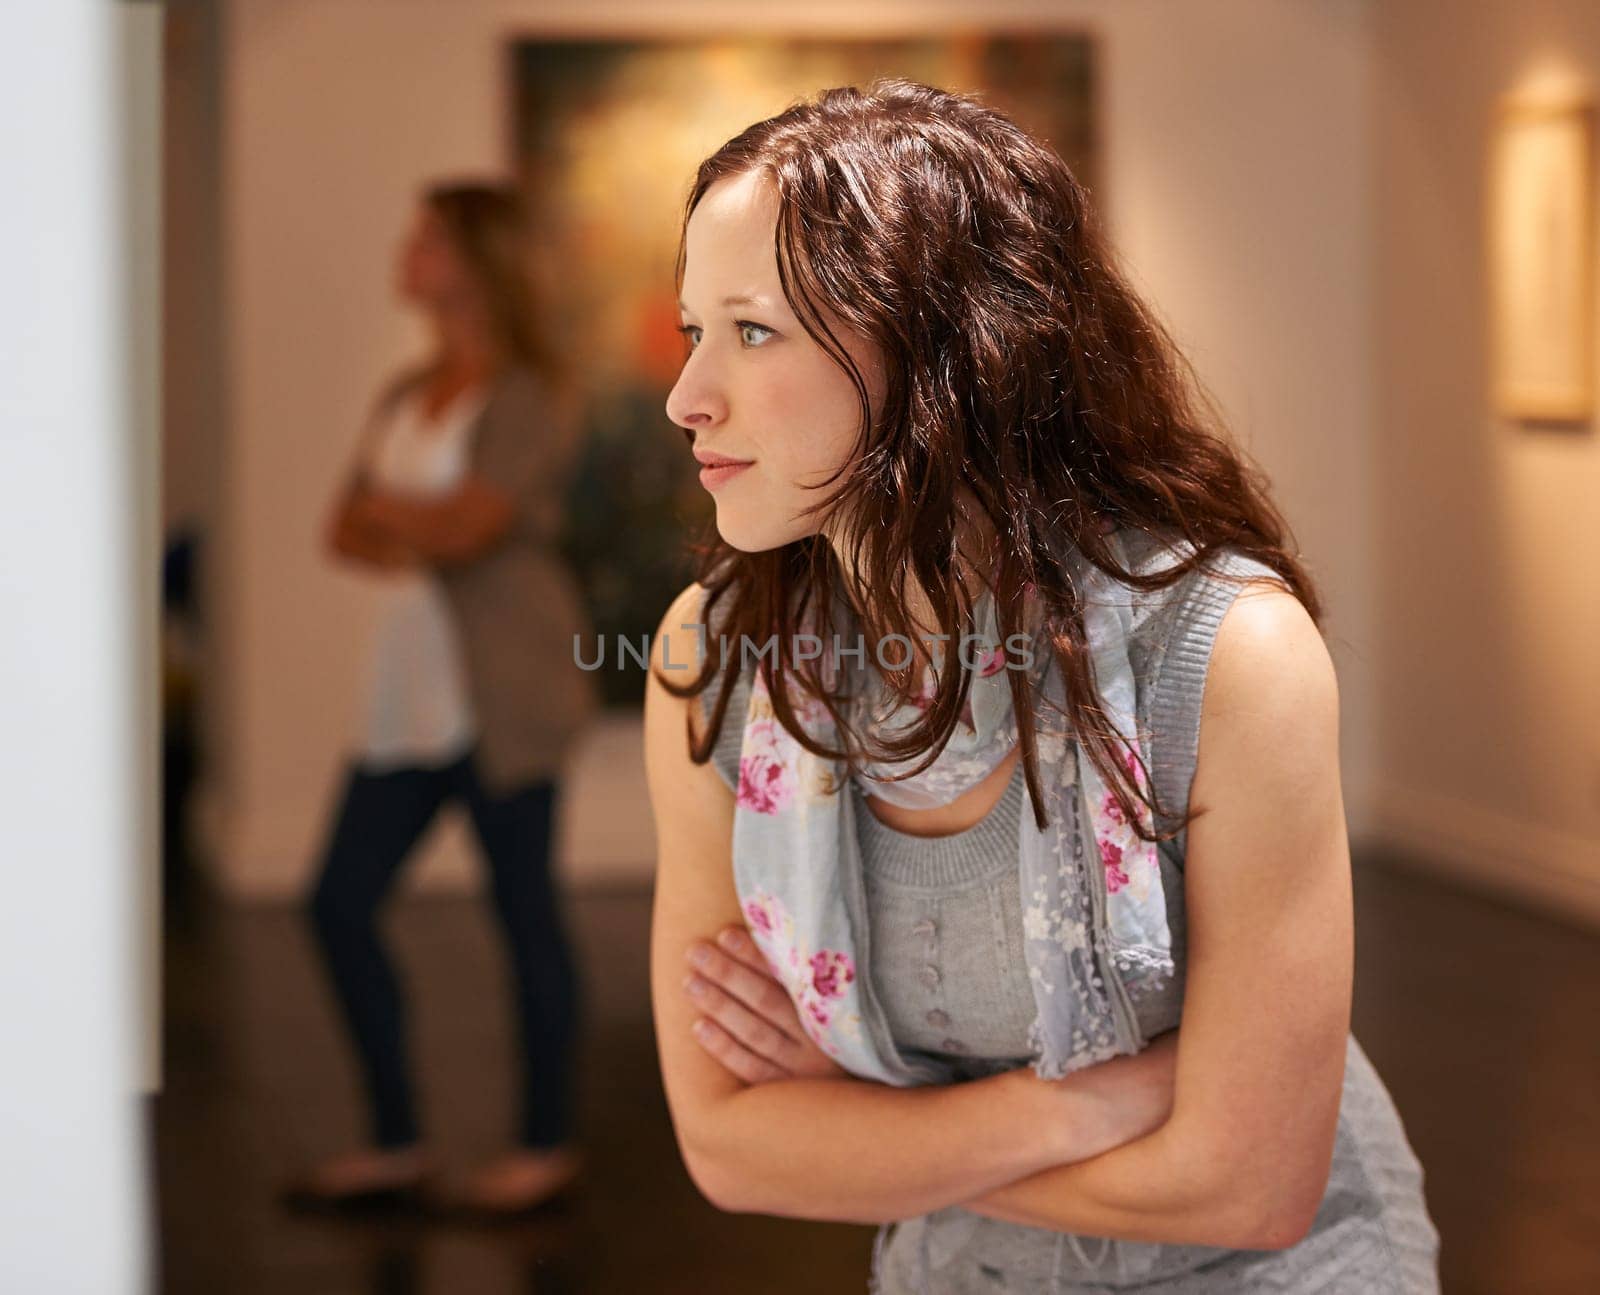 Museum, art and a woman in a painting gallery, looking at photography in creative appreciation. Artistic, design and culture with an attractive young female at an expo or modern artwork exhibition.